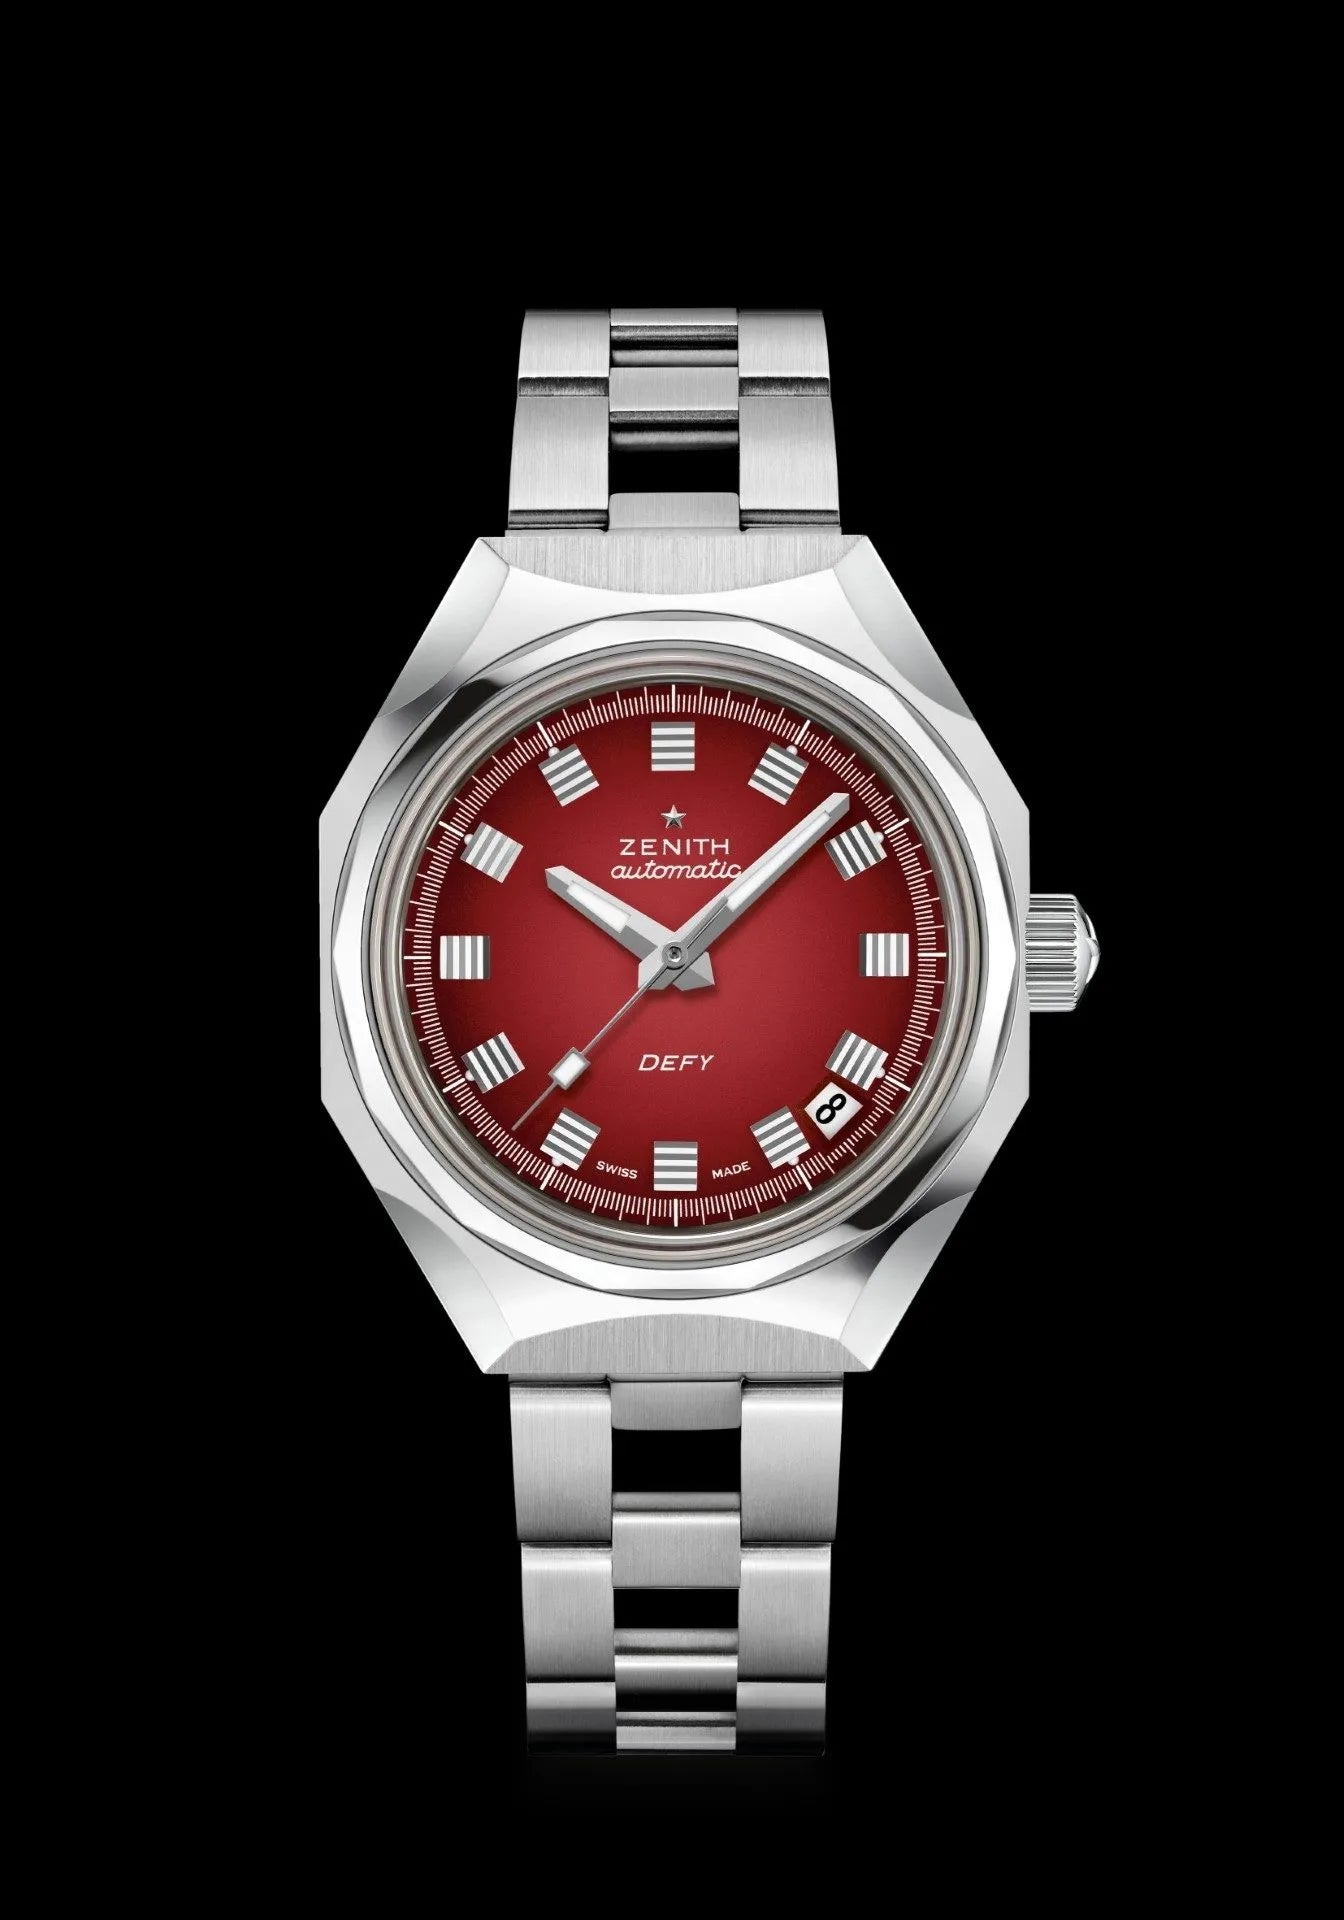 Zenith Defy Revival A3691 | Ruby Gradient Dial Watch | Harley's Time